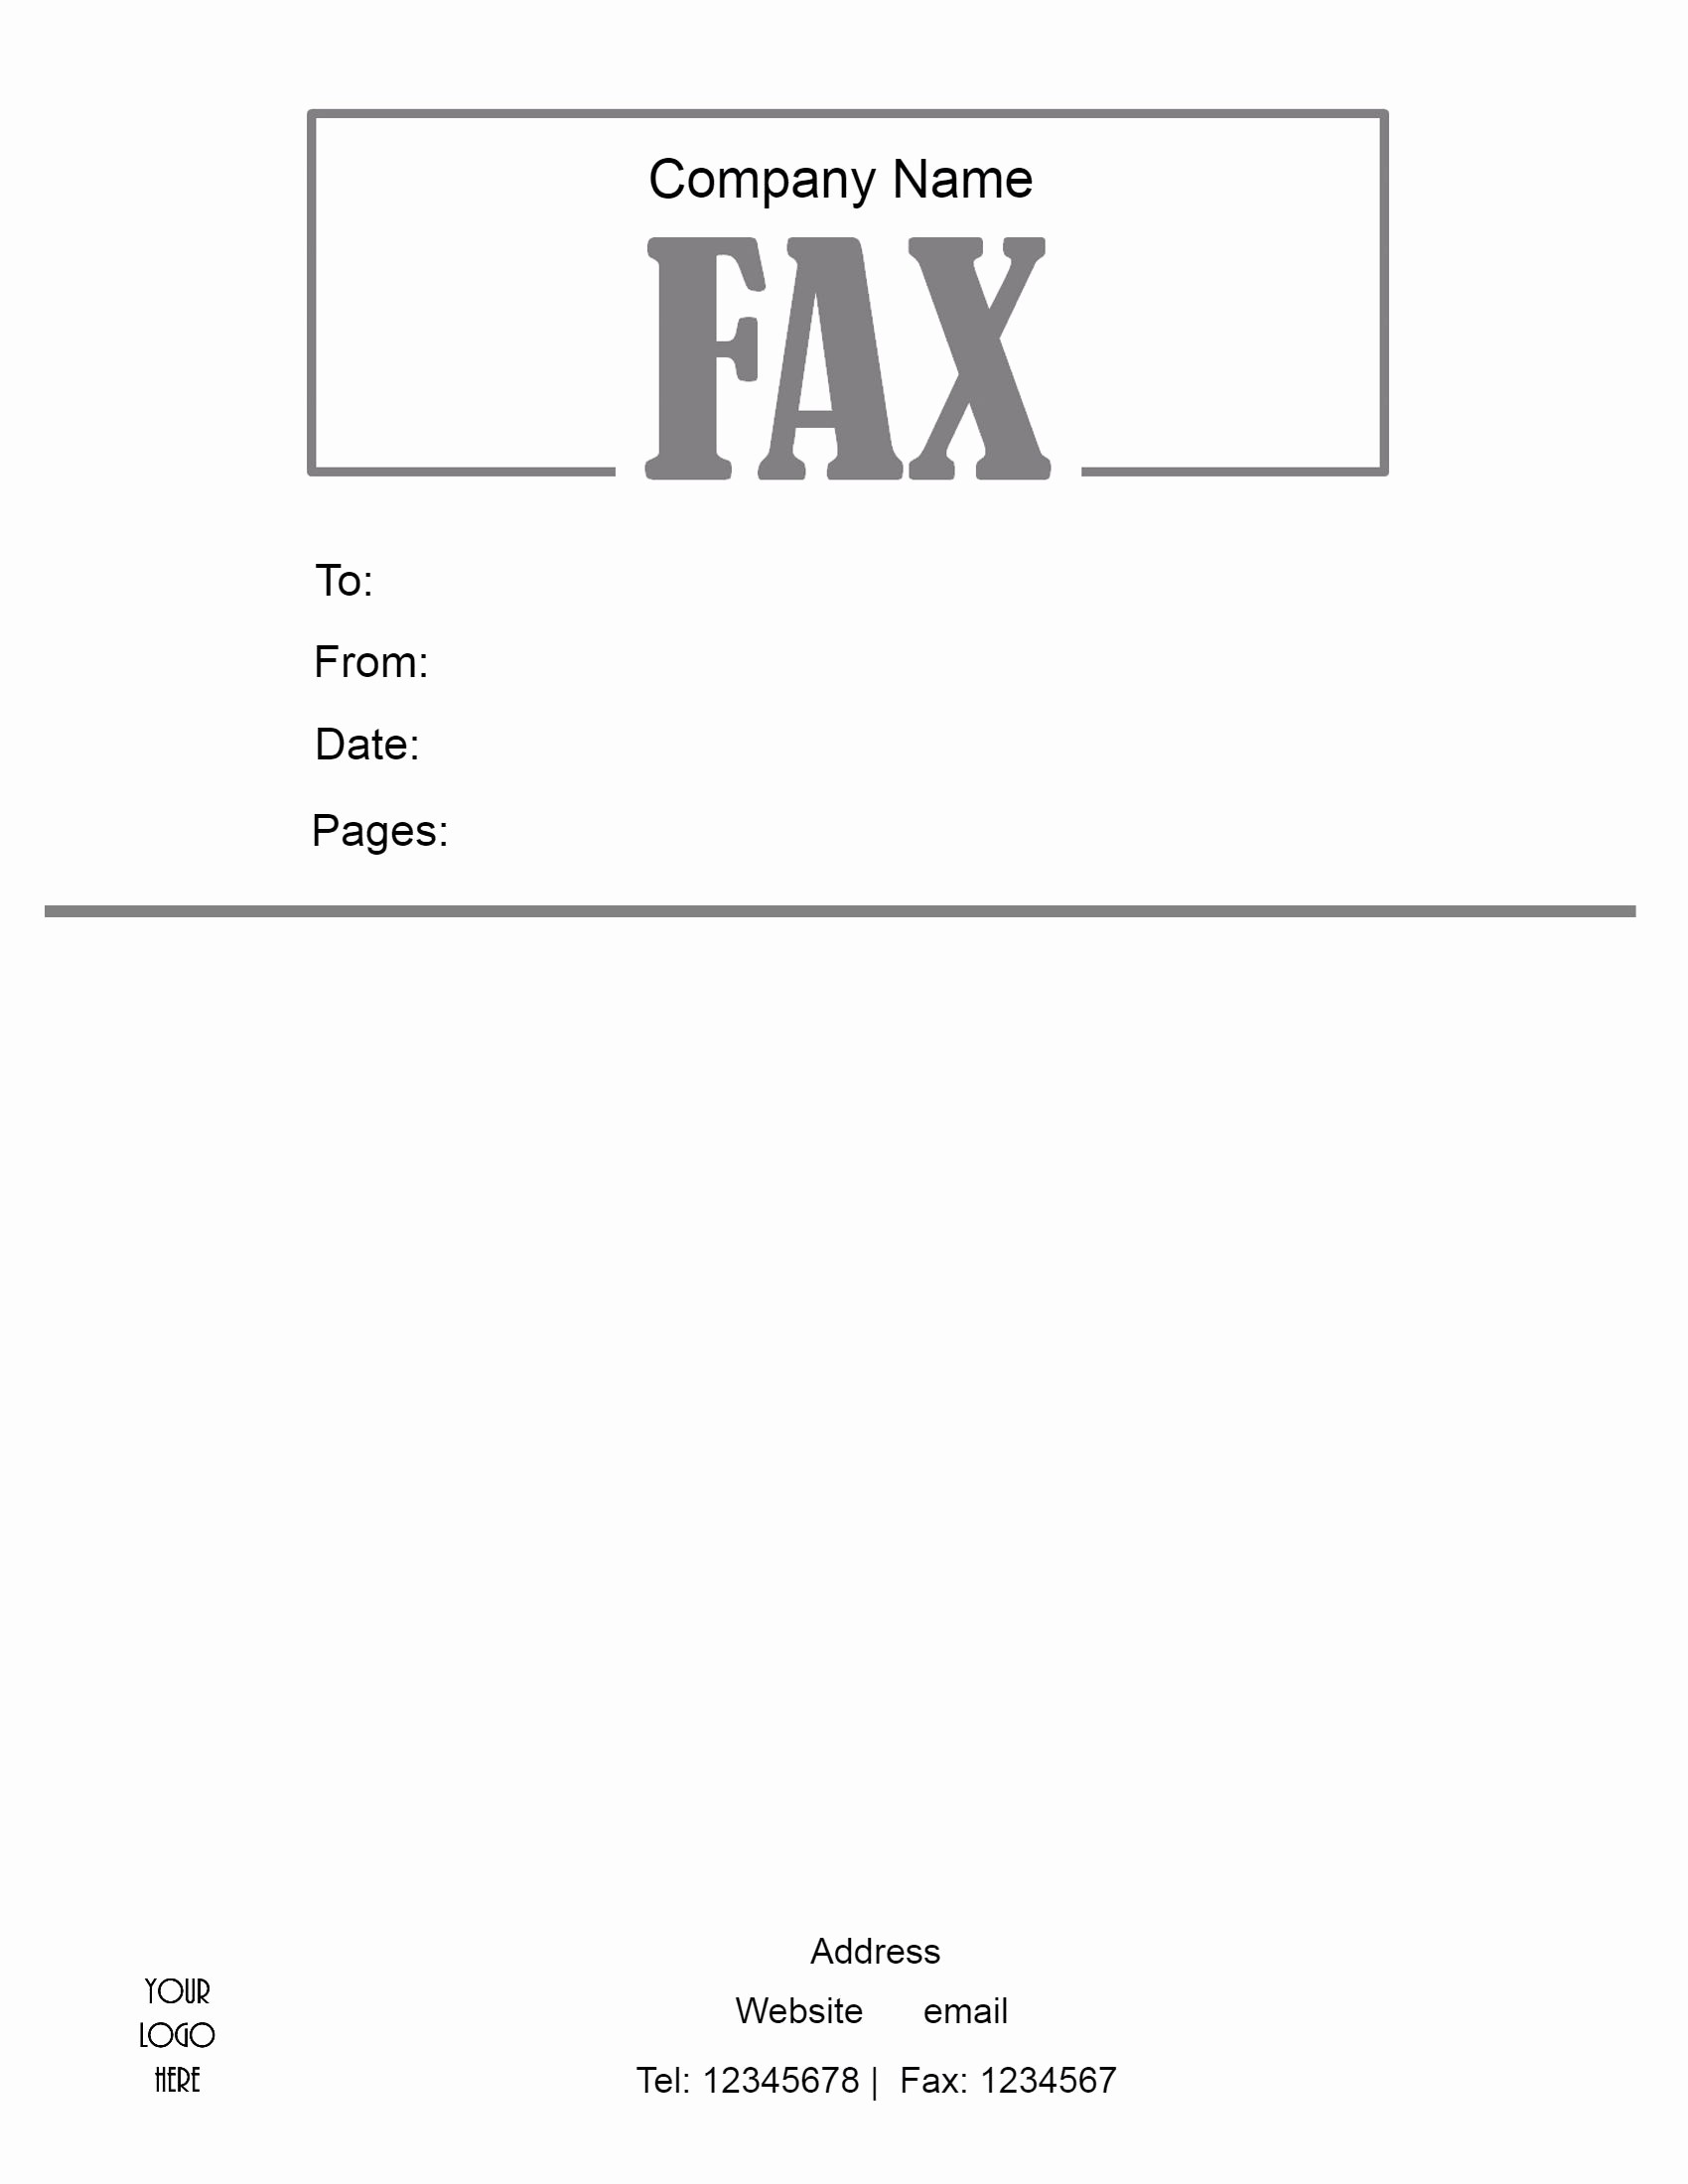 Fax Cover Sheet with Logo Fresh Free Fax Cover Sheet Template